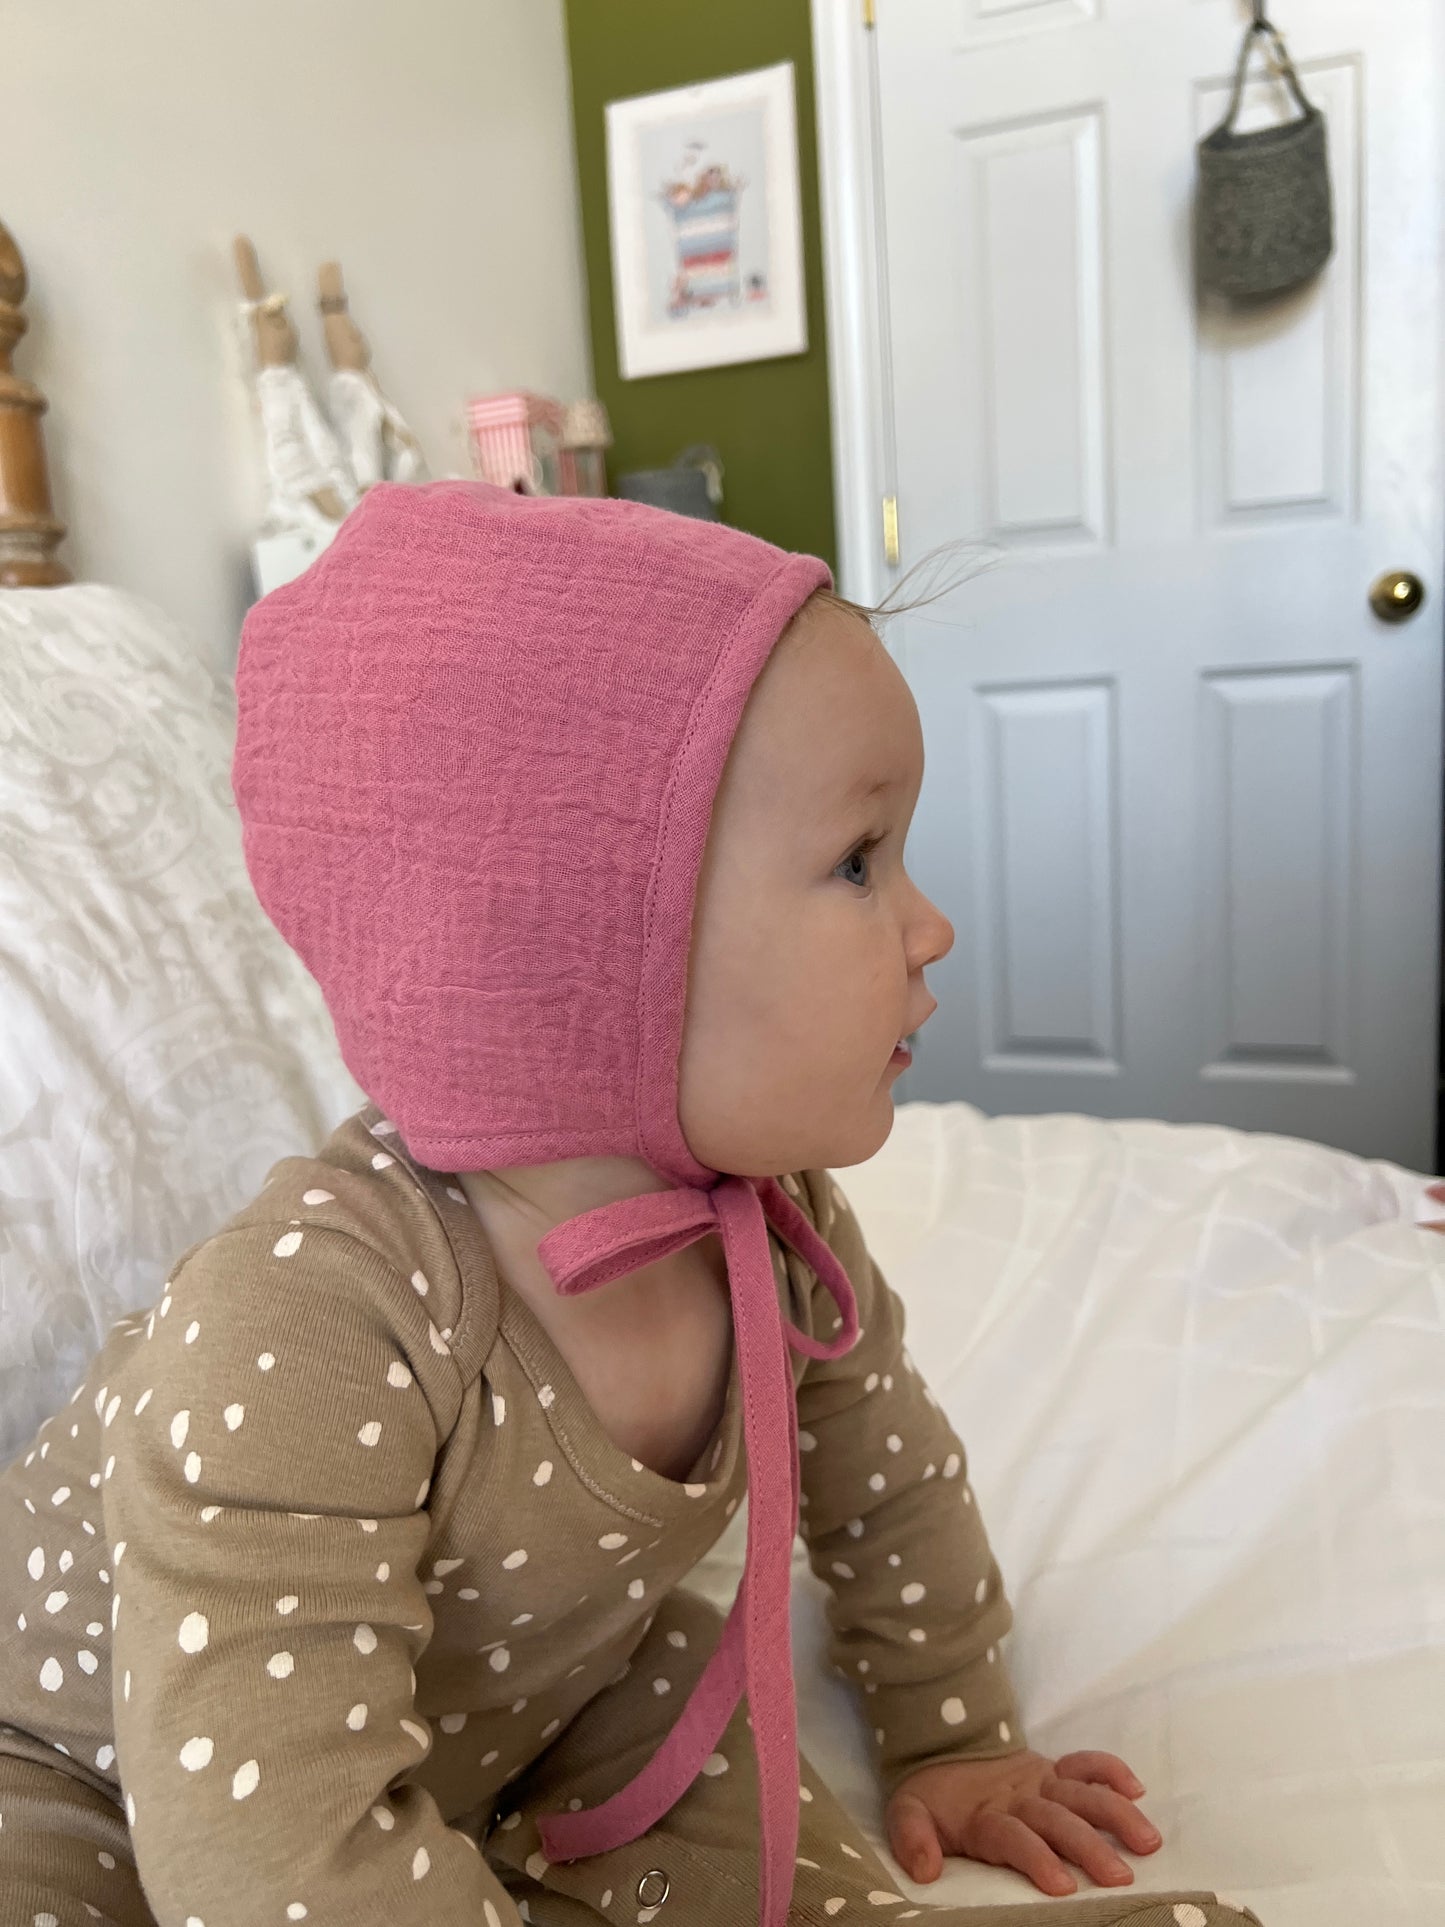 Classic Lined Bonnet Sewing Pattern